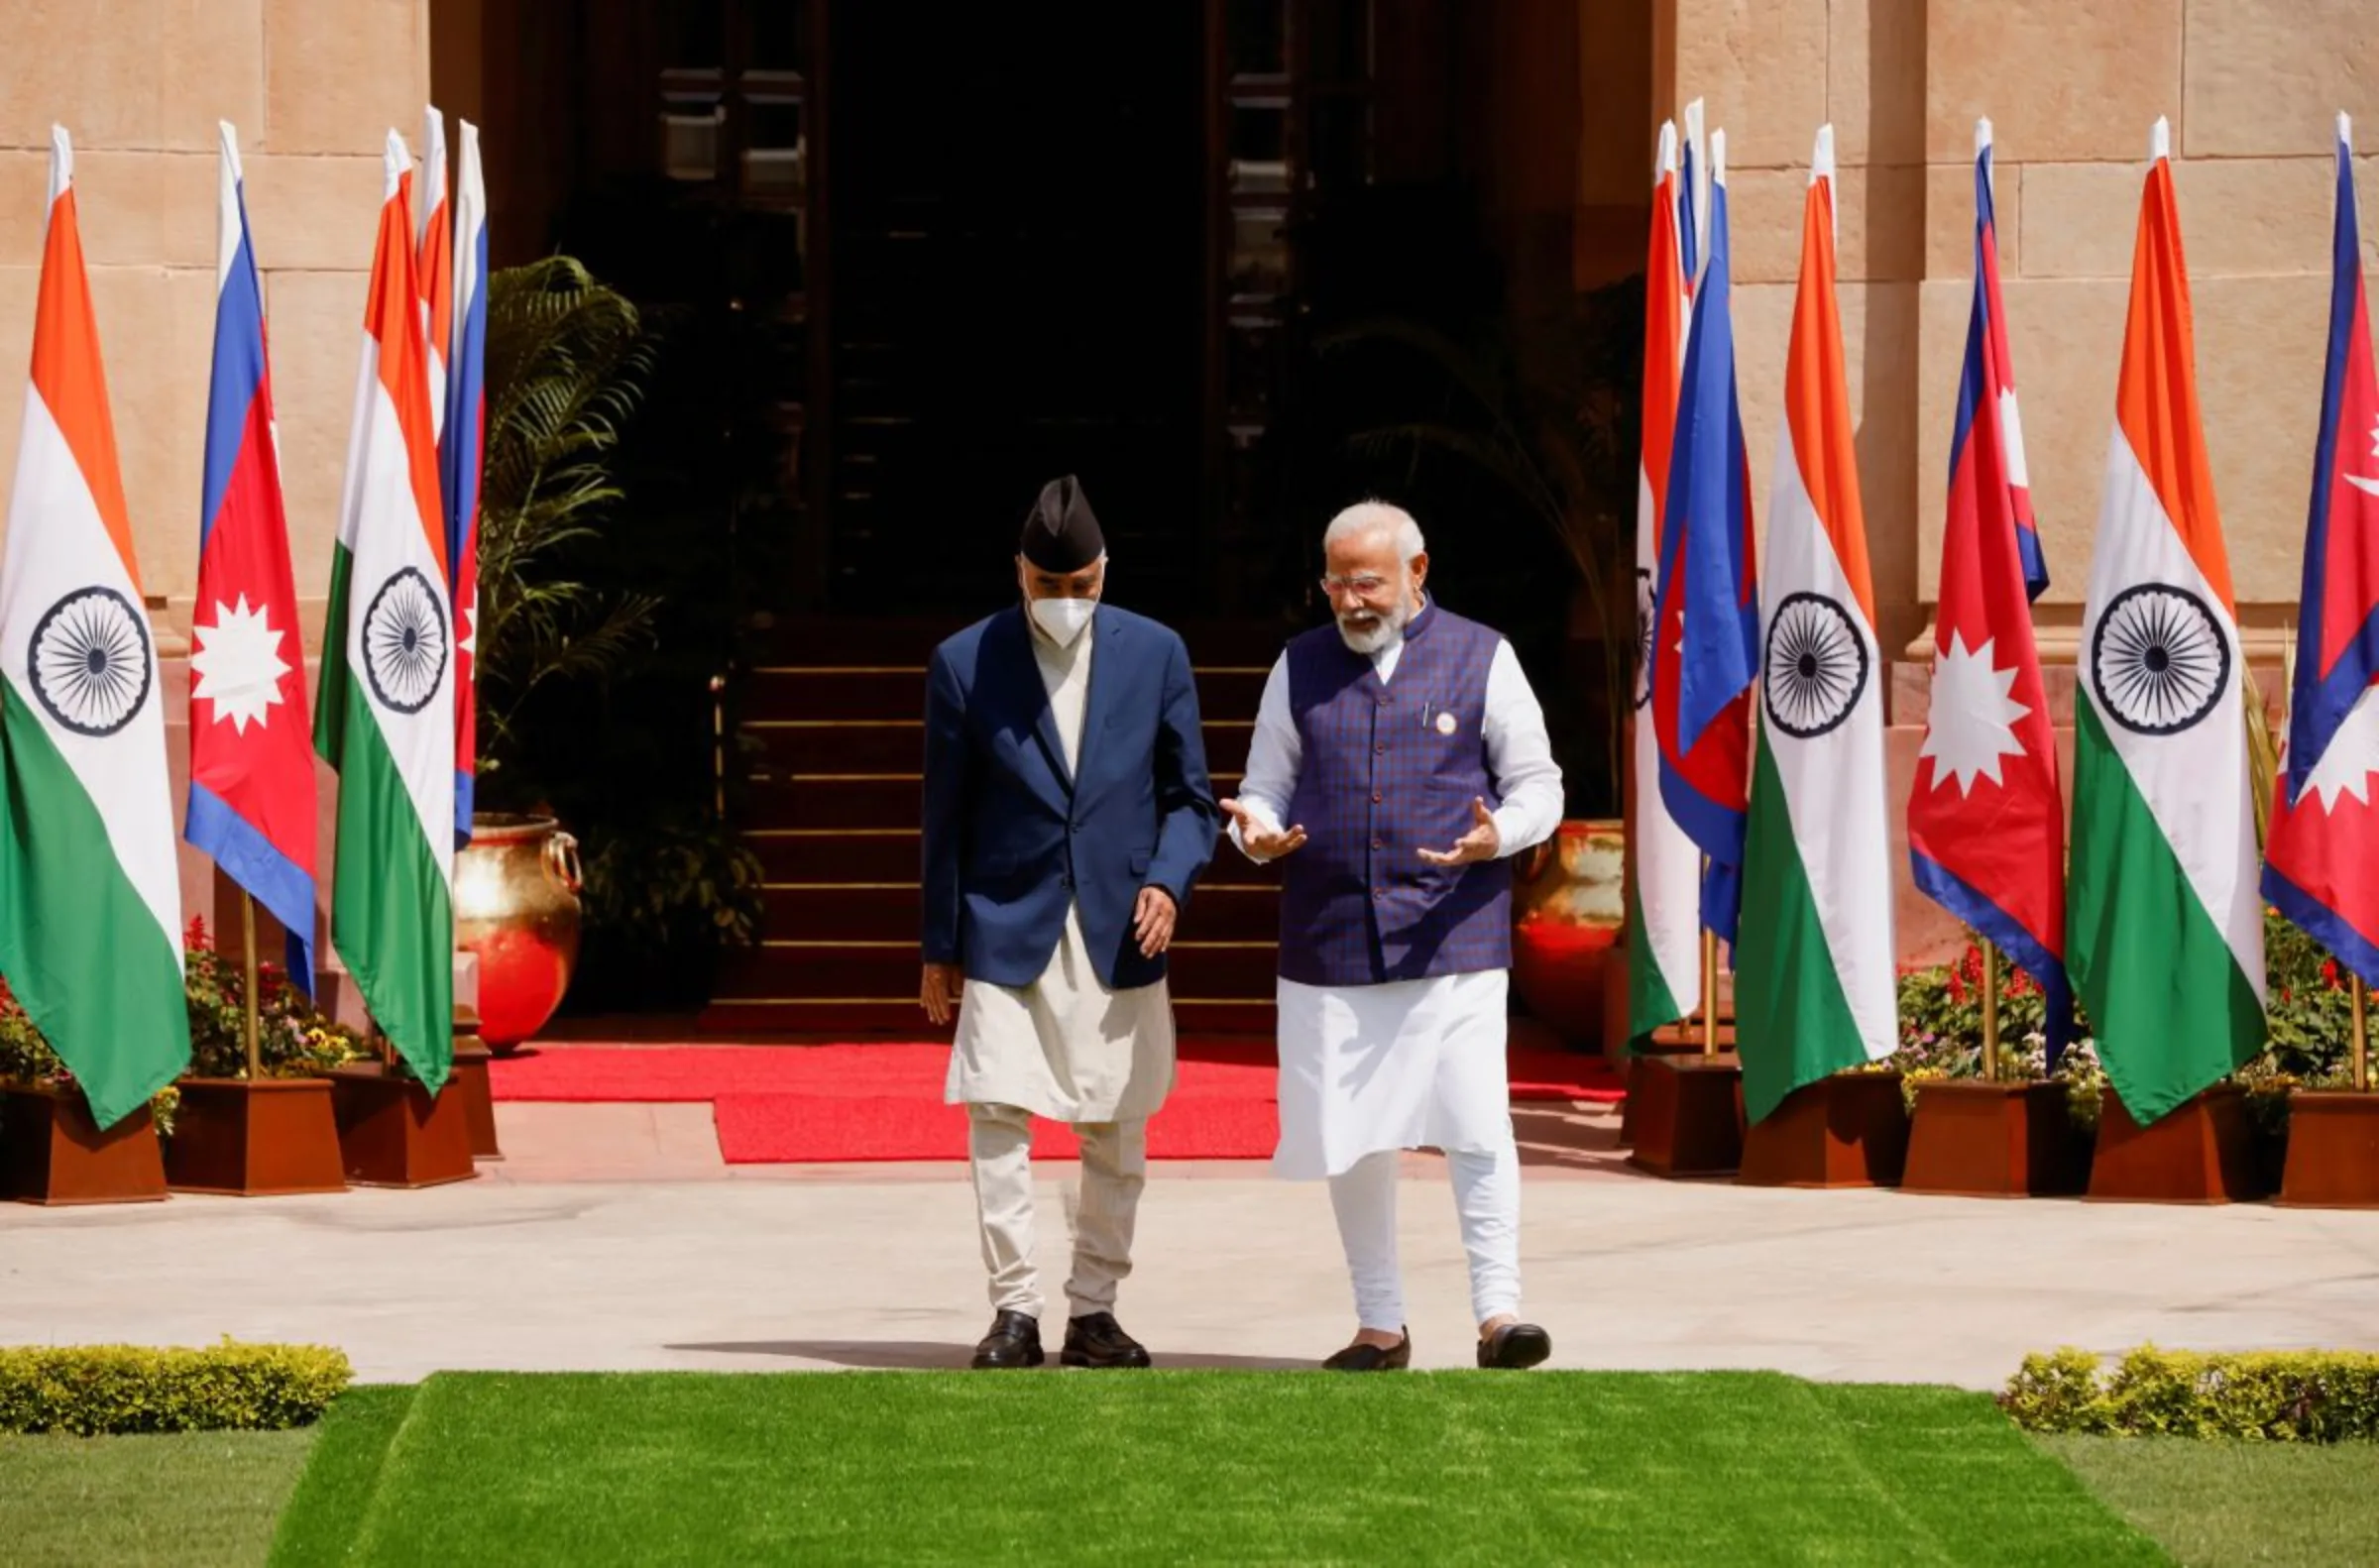 Nepal's Prime Minister Sher Bahadur Deuba speaks his Indian counterpart Narendra Modi ahead of their meeting at Hyderabad House in New Delhi, India April 2, 2022